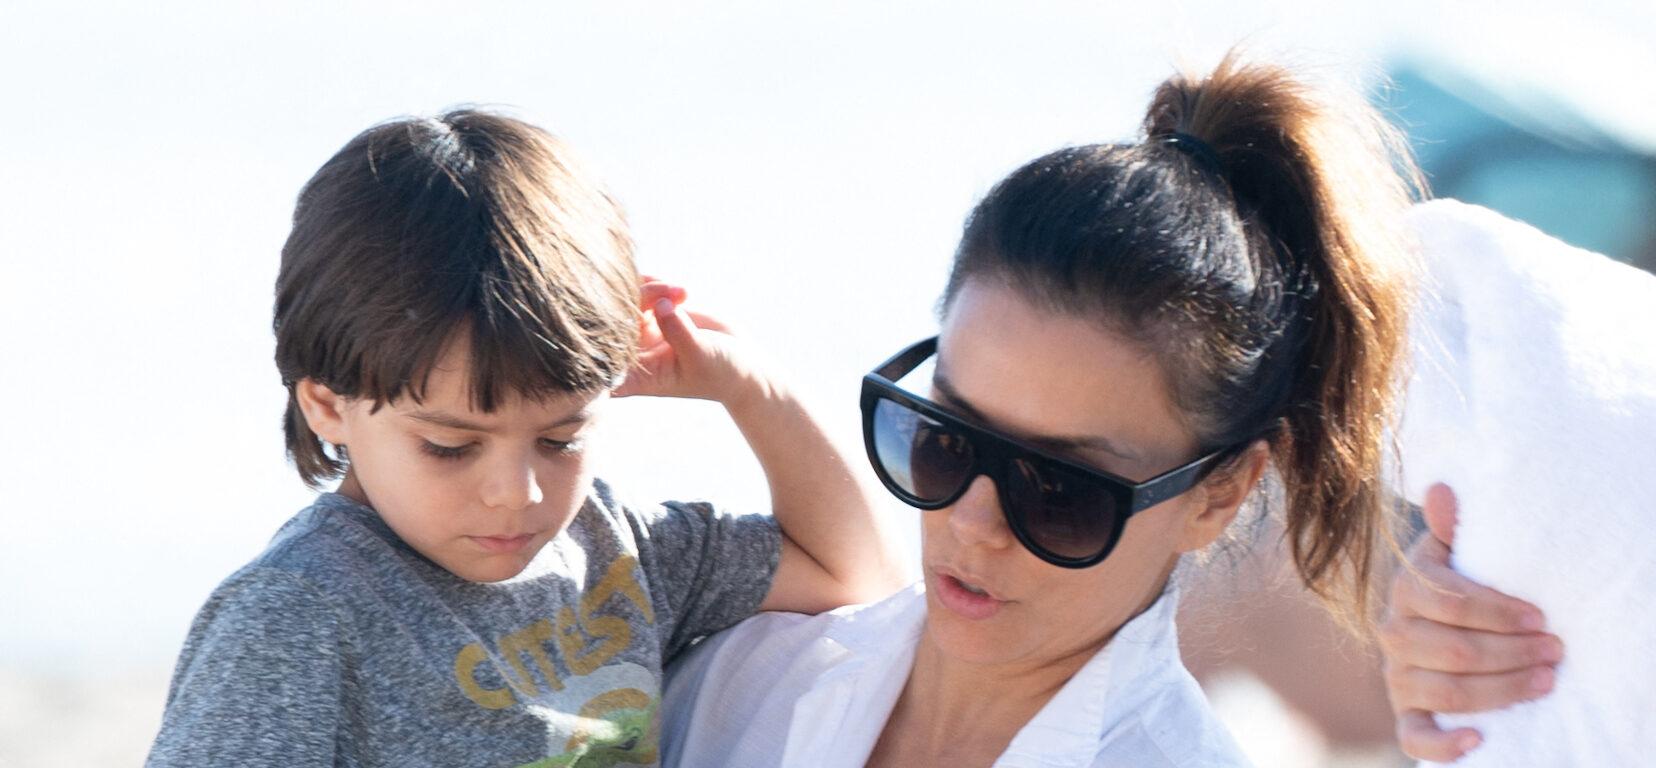 Eva Longoria Overflows With Joy As Son Turns 5: ‘Another Year Of Happiness’